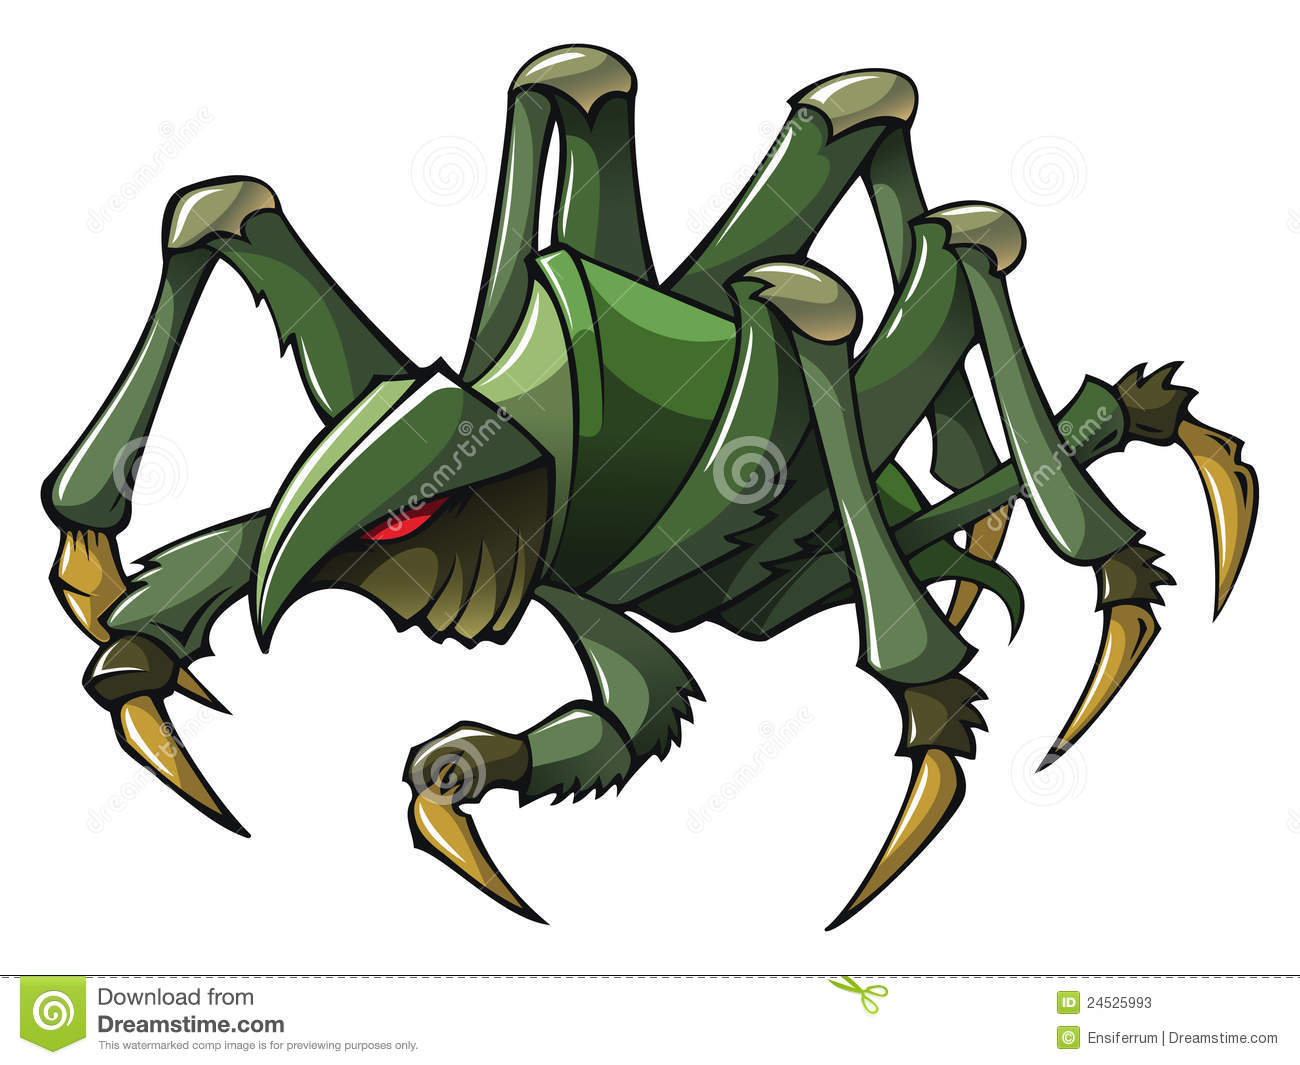 Scary Spider Stock Photos   Image  24525993